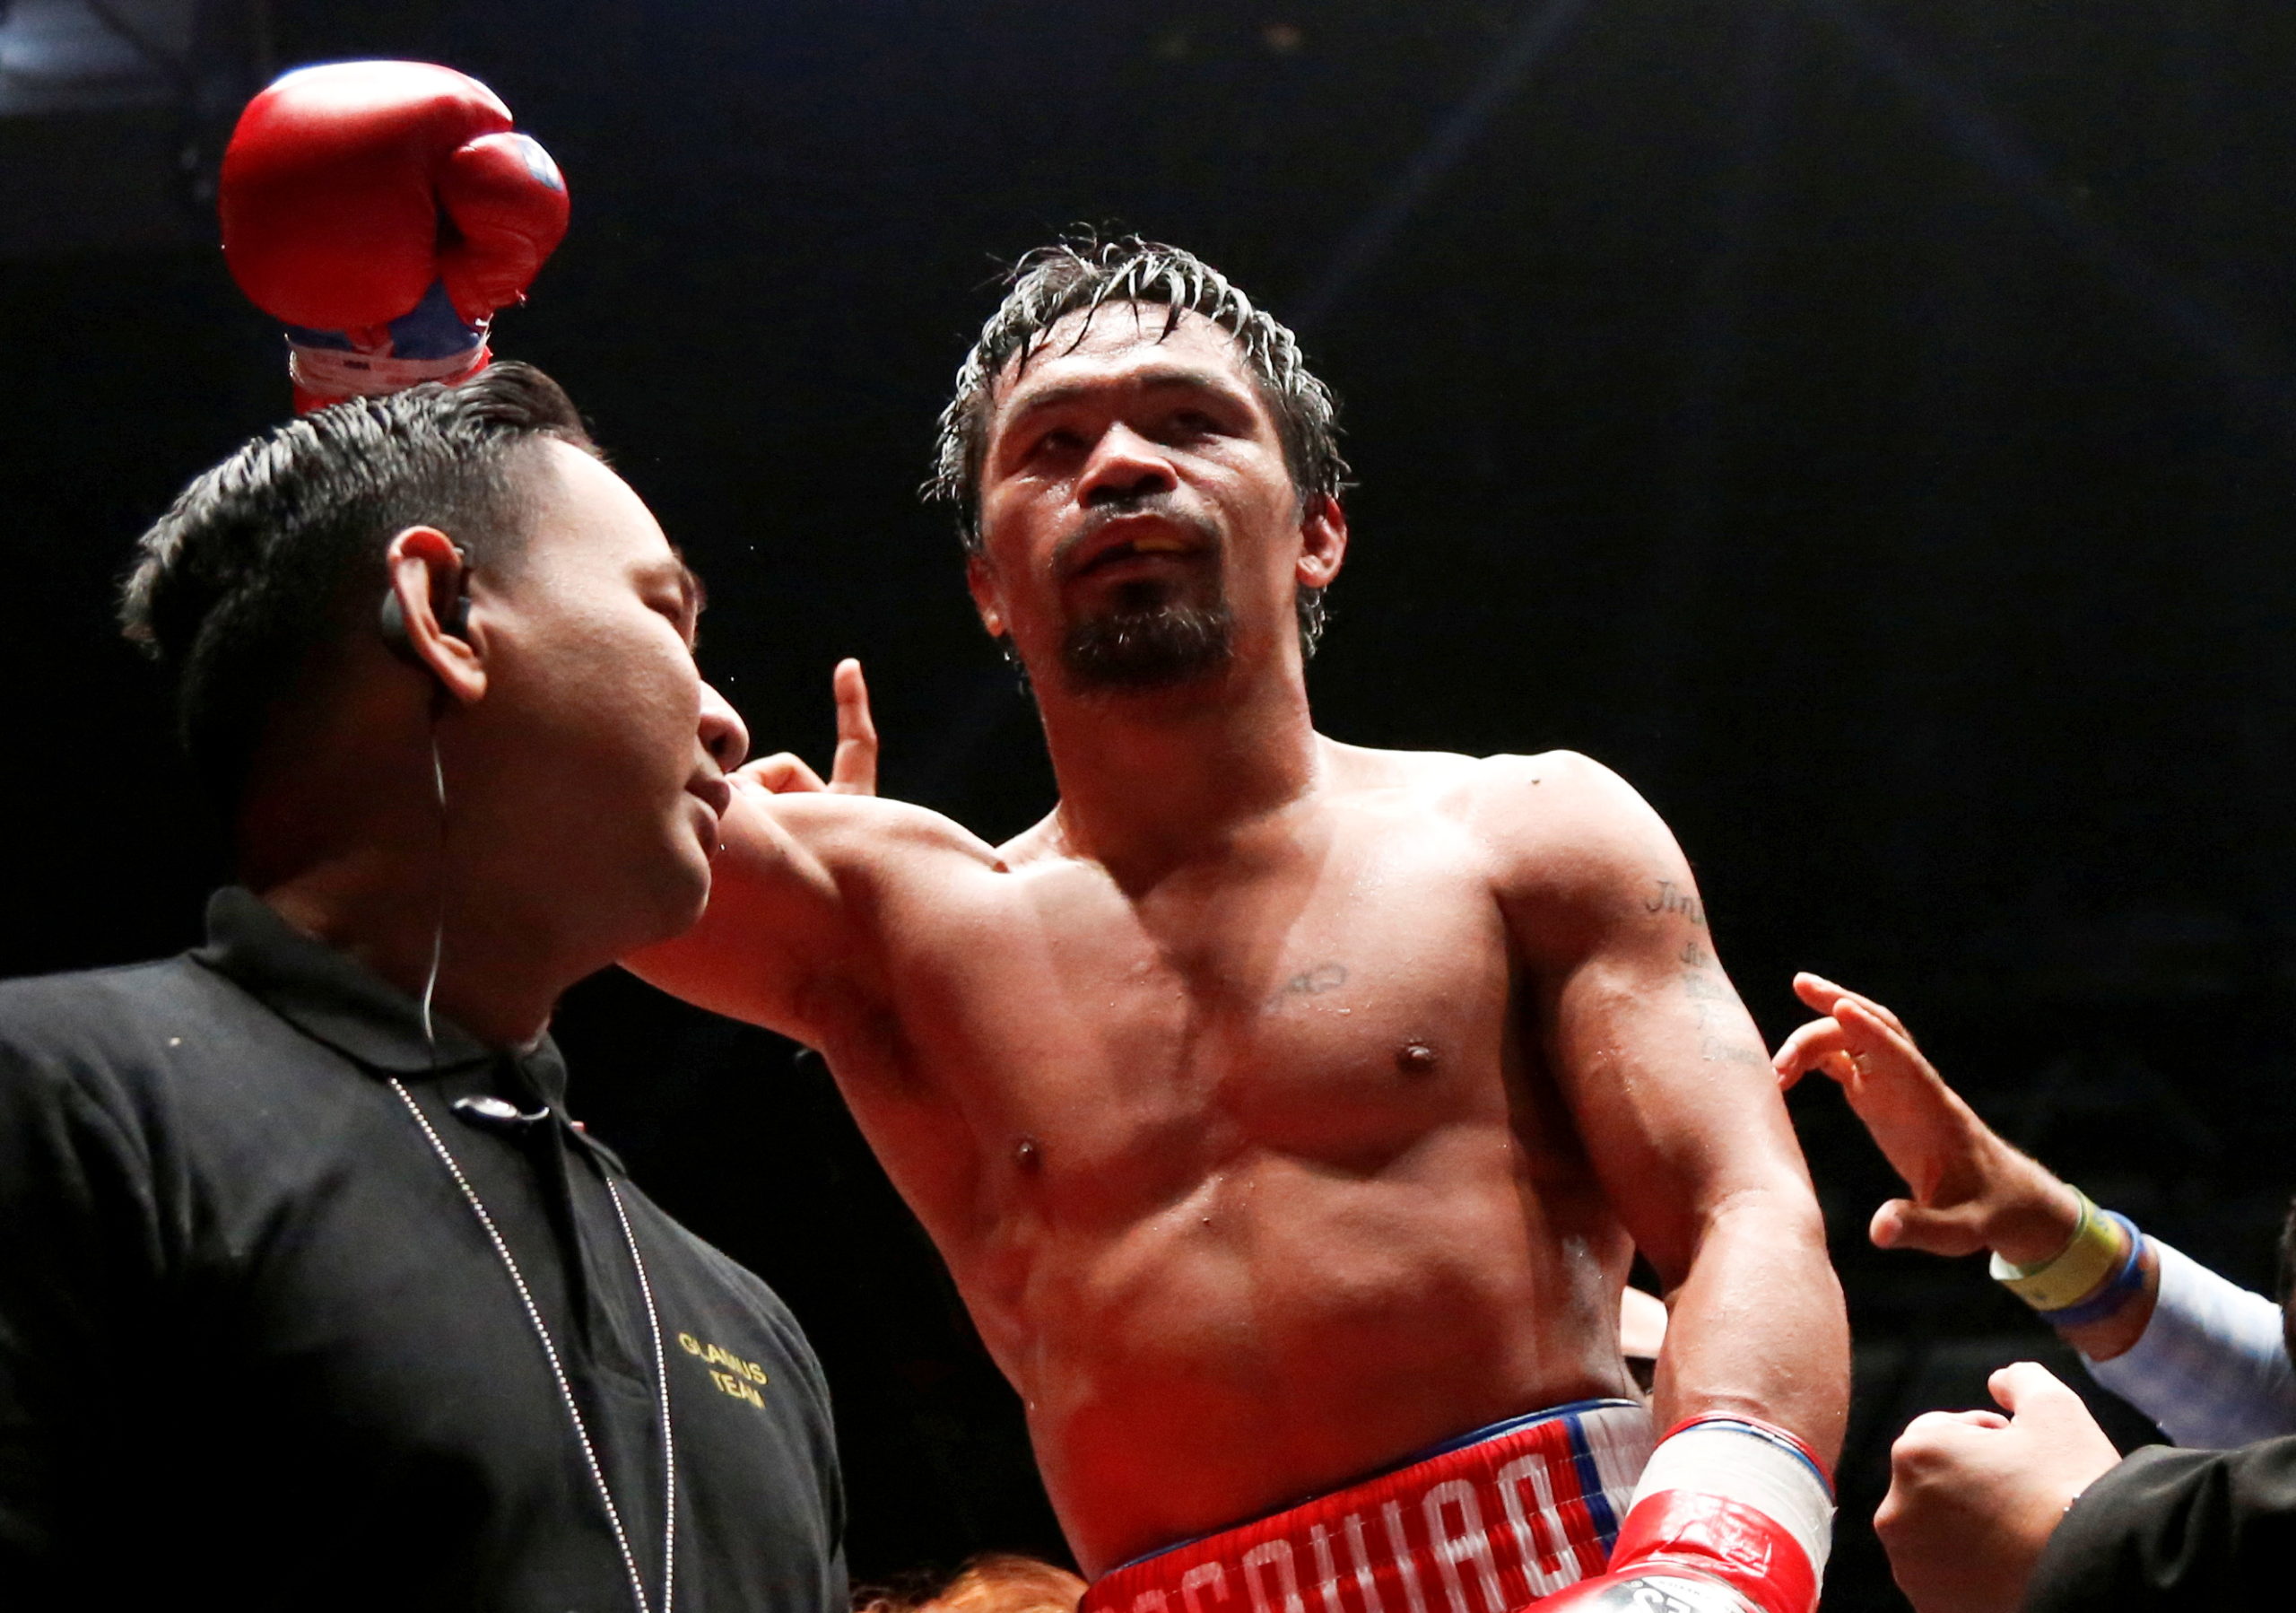 boxing legend Manny Pacquiao celebrates after winning the bout against Lucas Matthysse. Picture taken July 15, 2018.